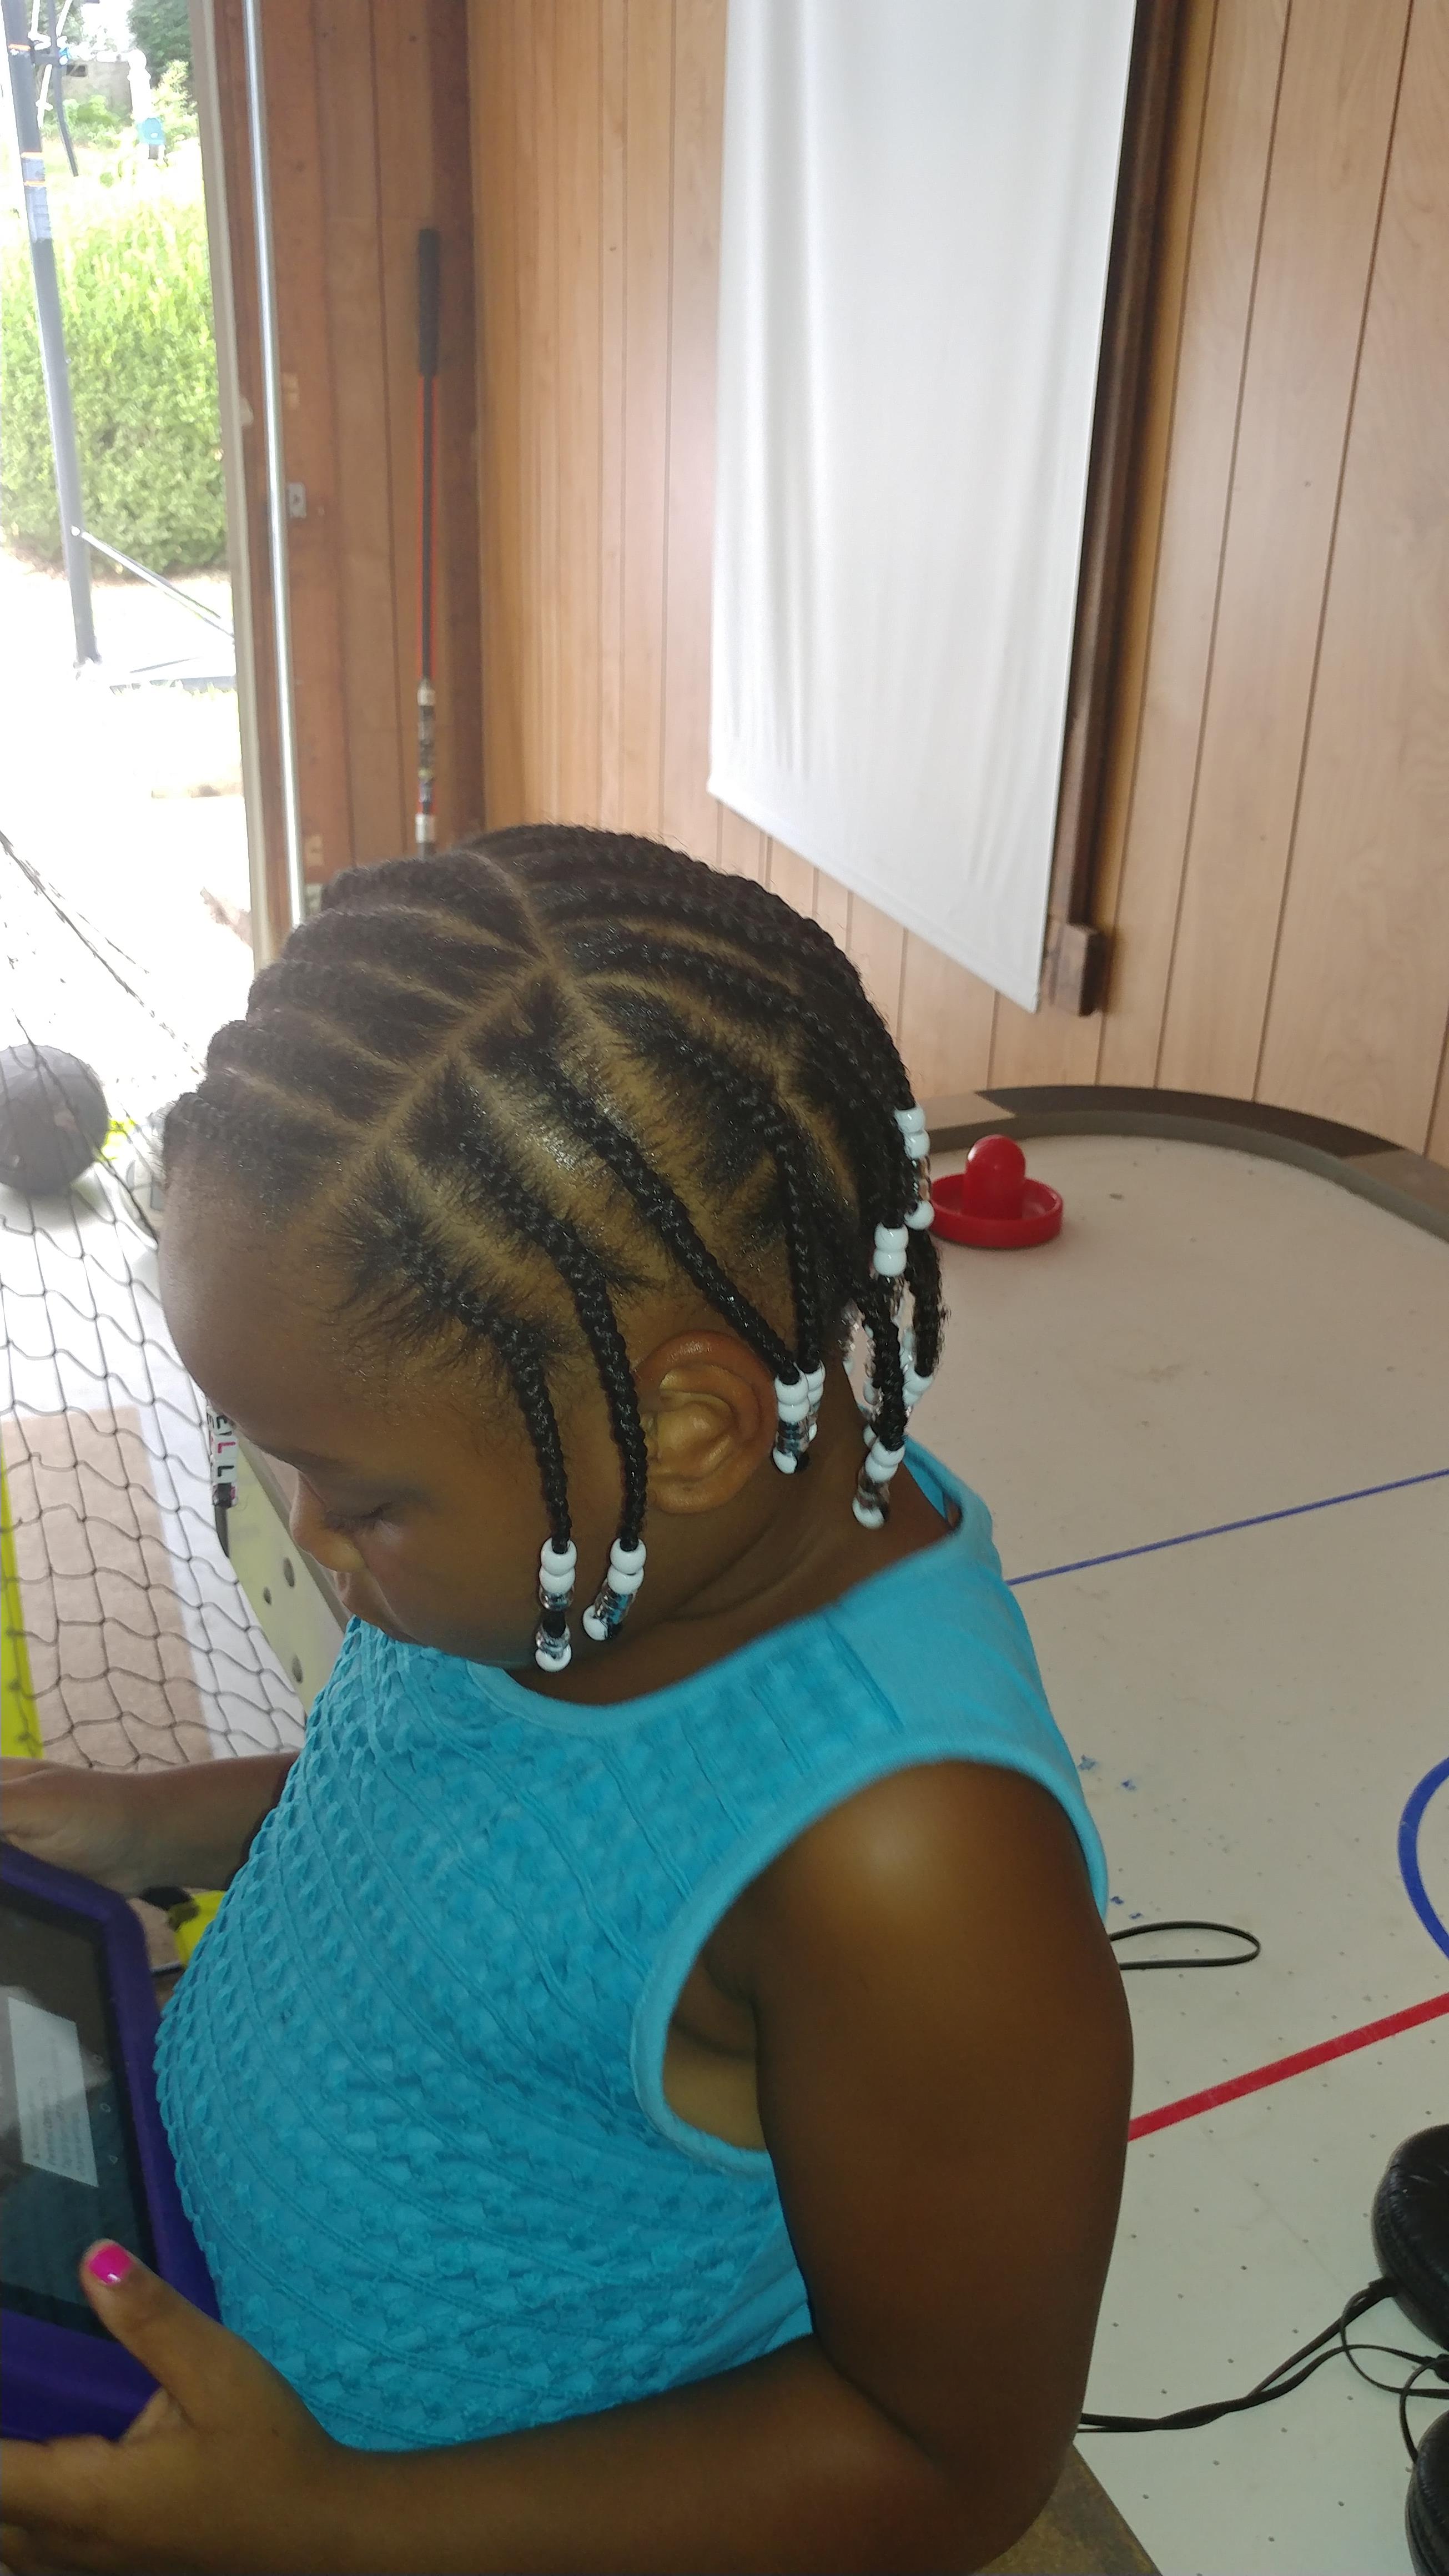 April's Braids & Beads For Children In Durham NC